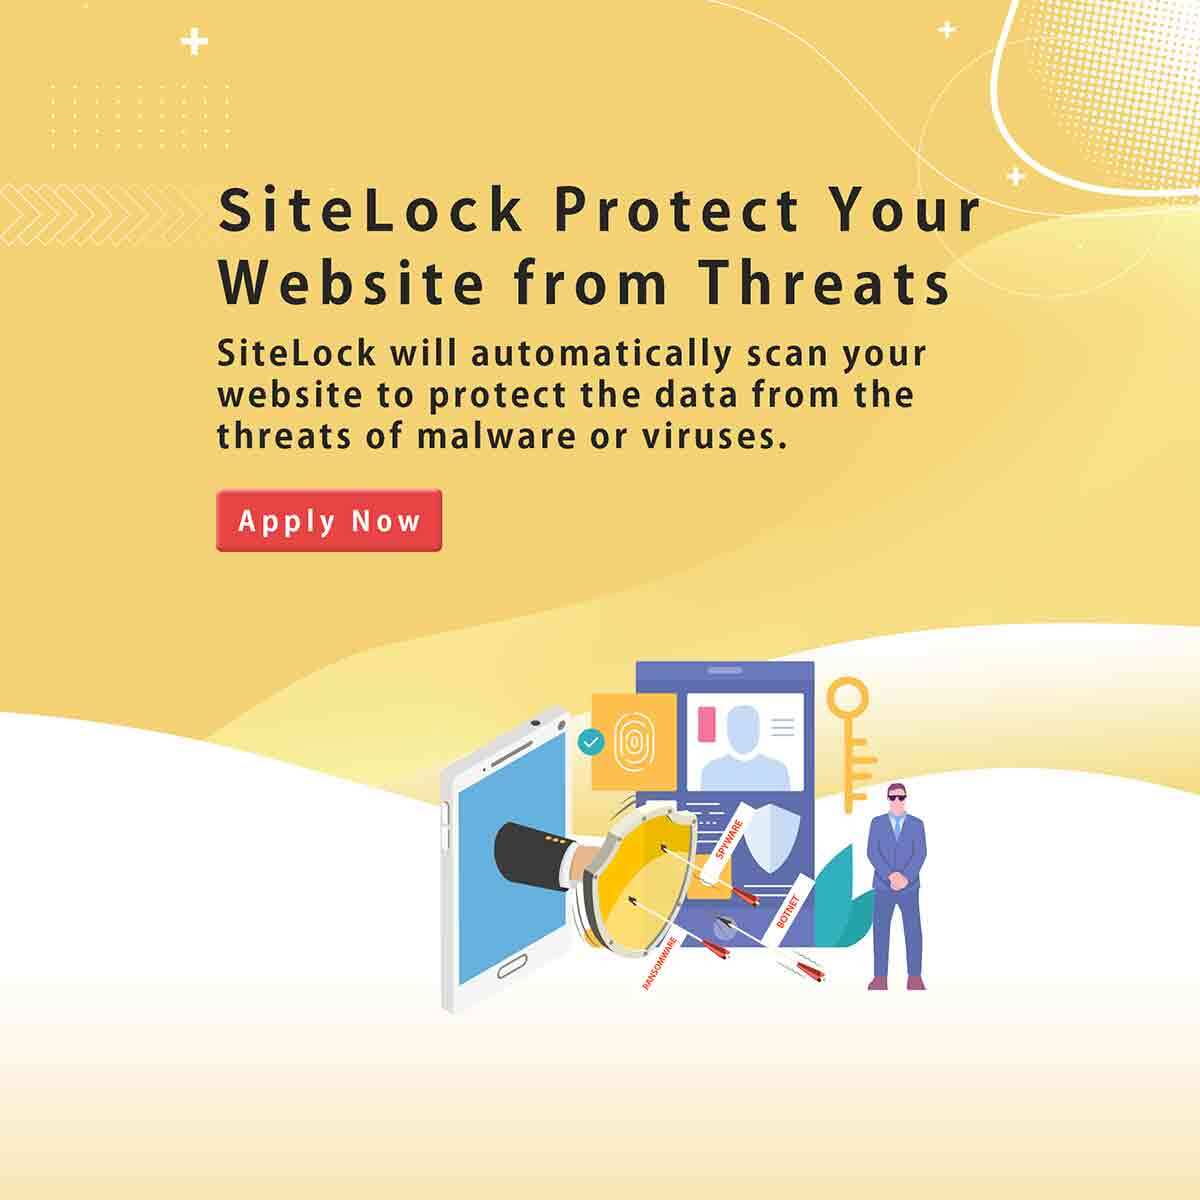 SiteLock protect your website from threats